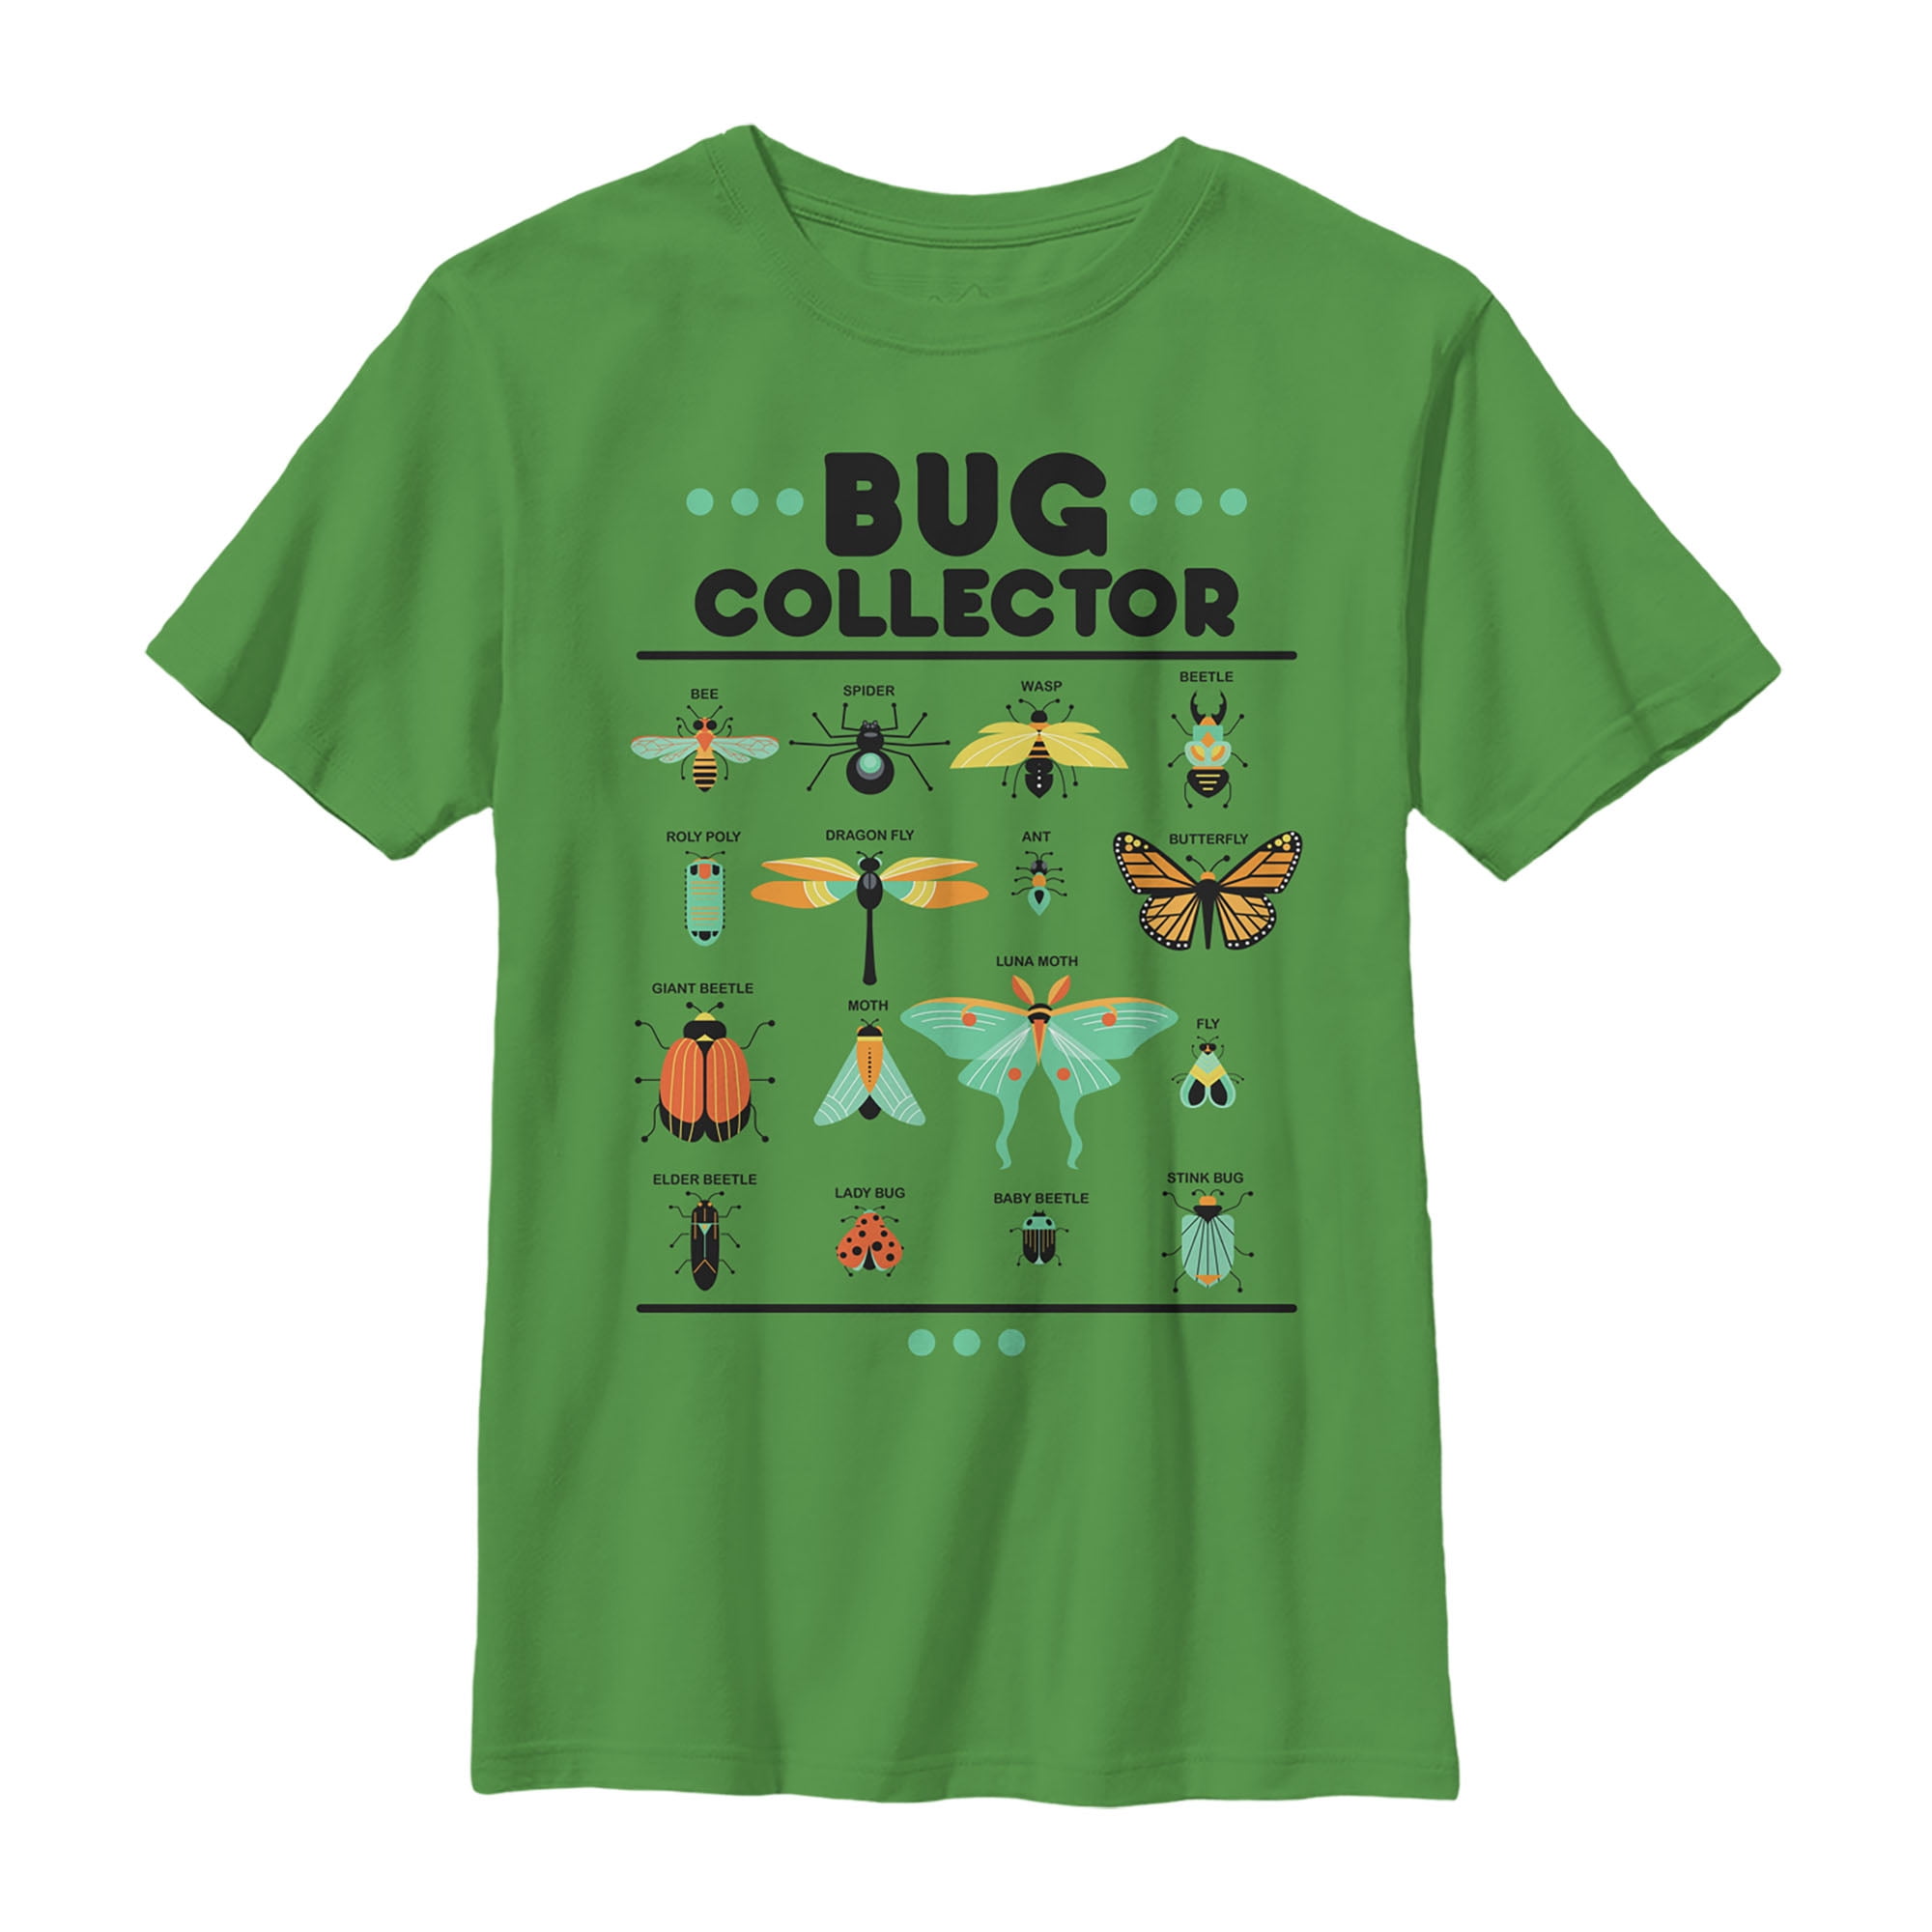 Boy's Lost Gods Bug Collector T-Shirt - Kelly Green - Large